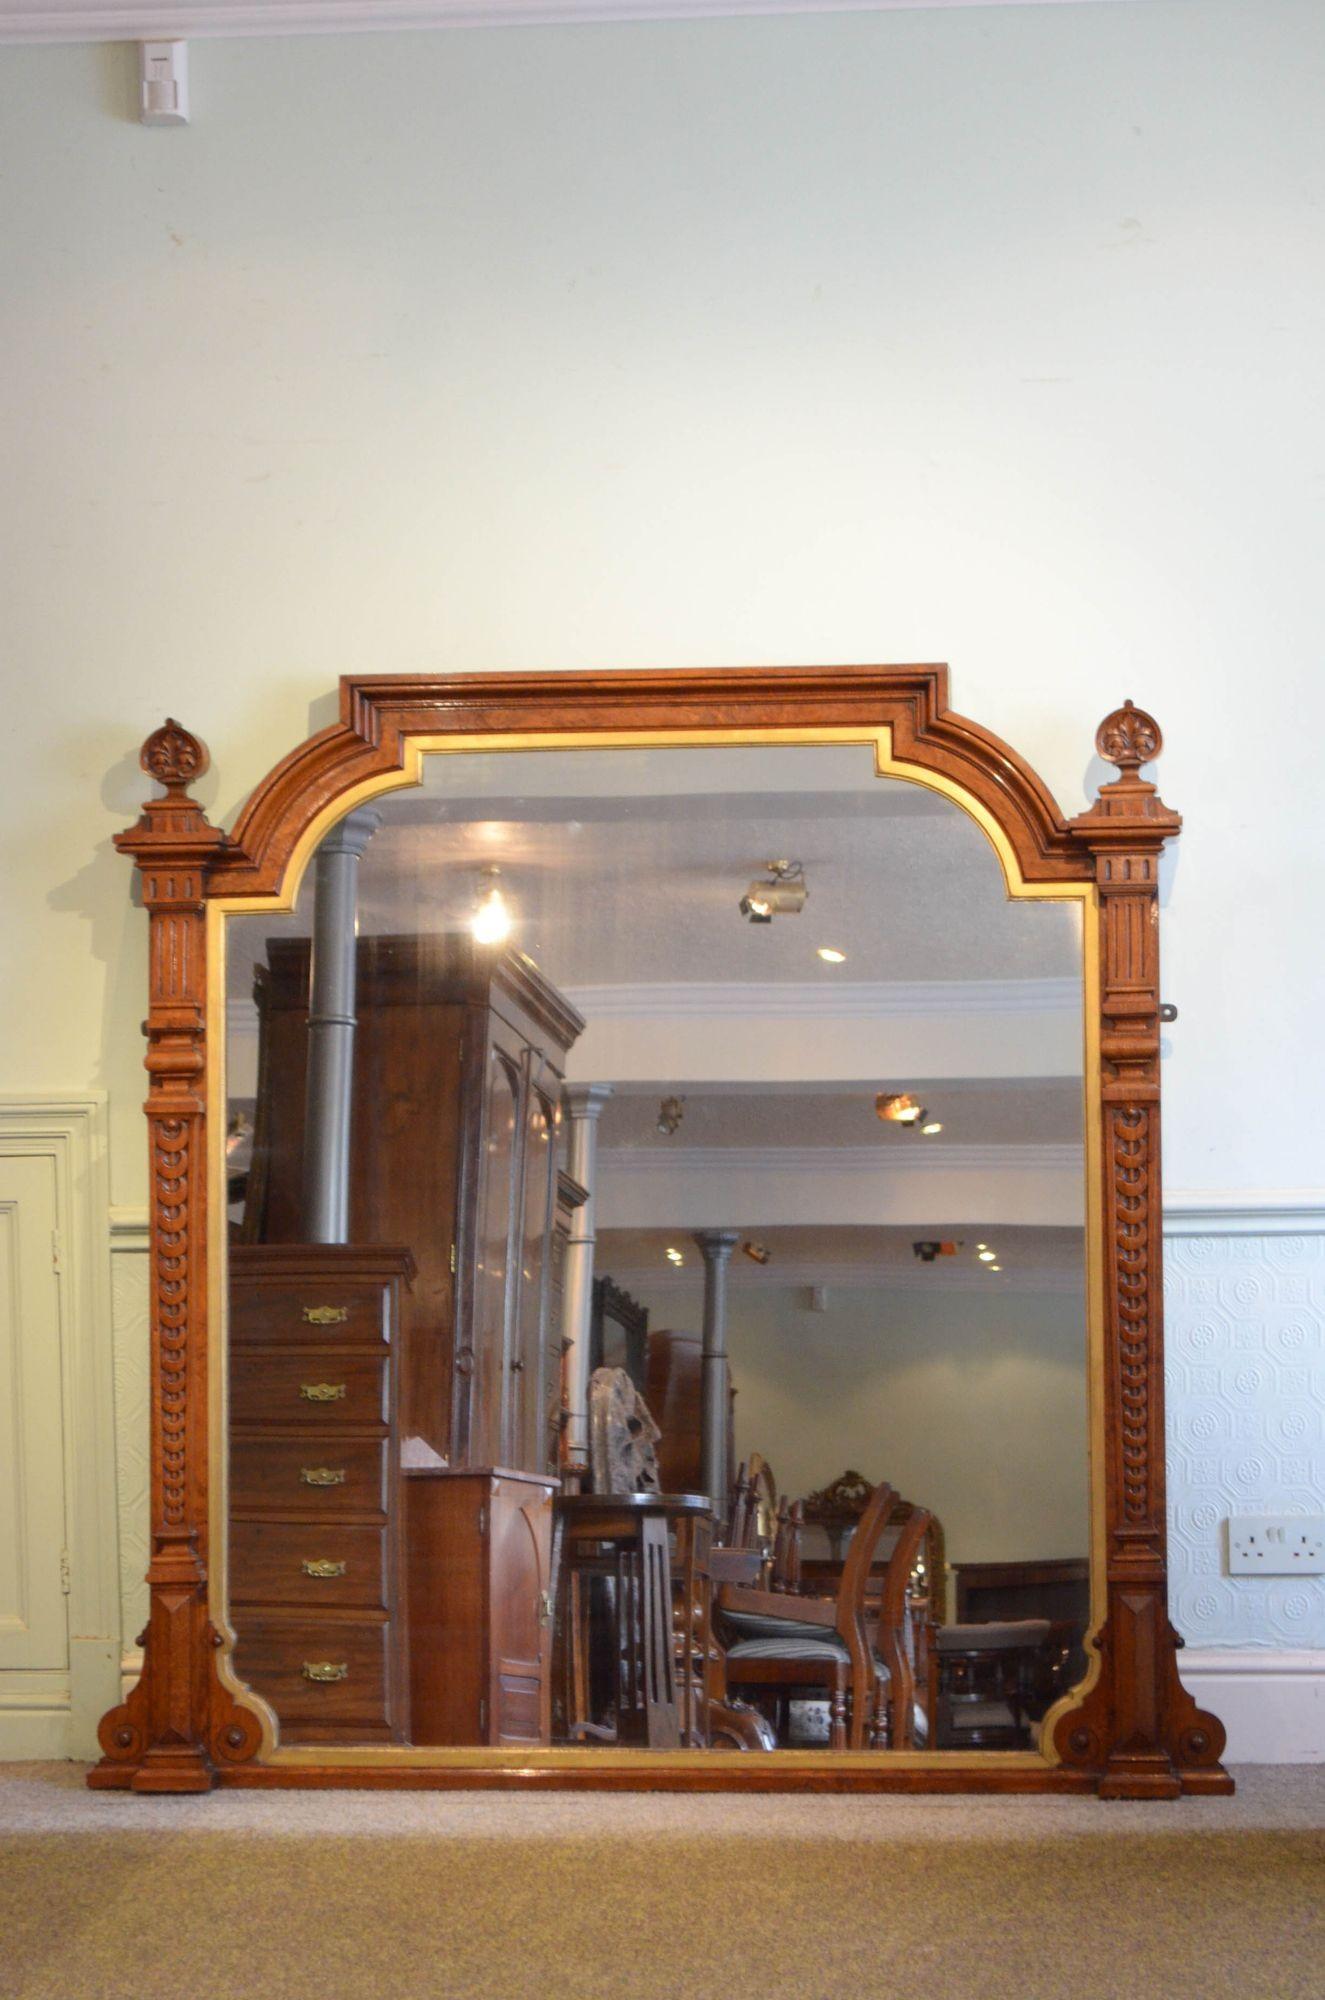 Sn5452 Superb Victorian pollard oak overmantel or wall mirror, having original glass with minor imperfections in pollard oak frame with decorative gilded moulding to the inner edge, shaped scrolls to the base, carved pilasters and finely carved